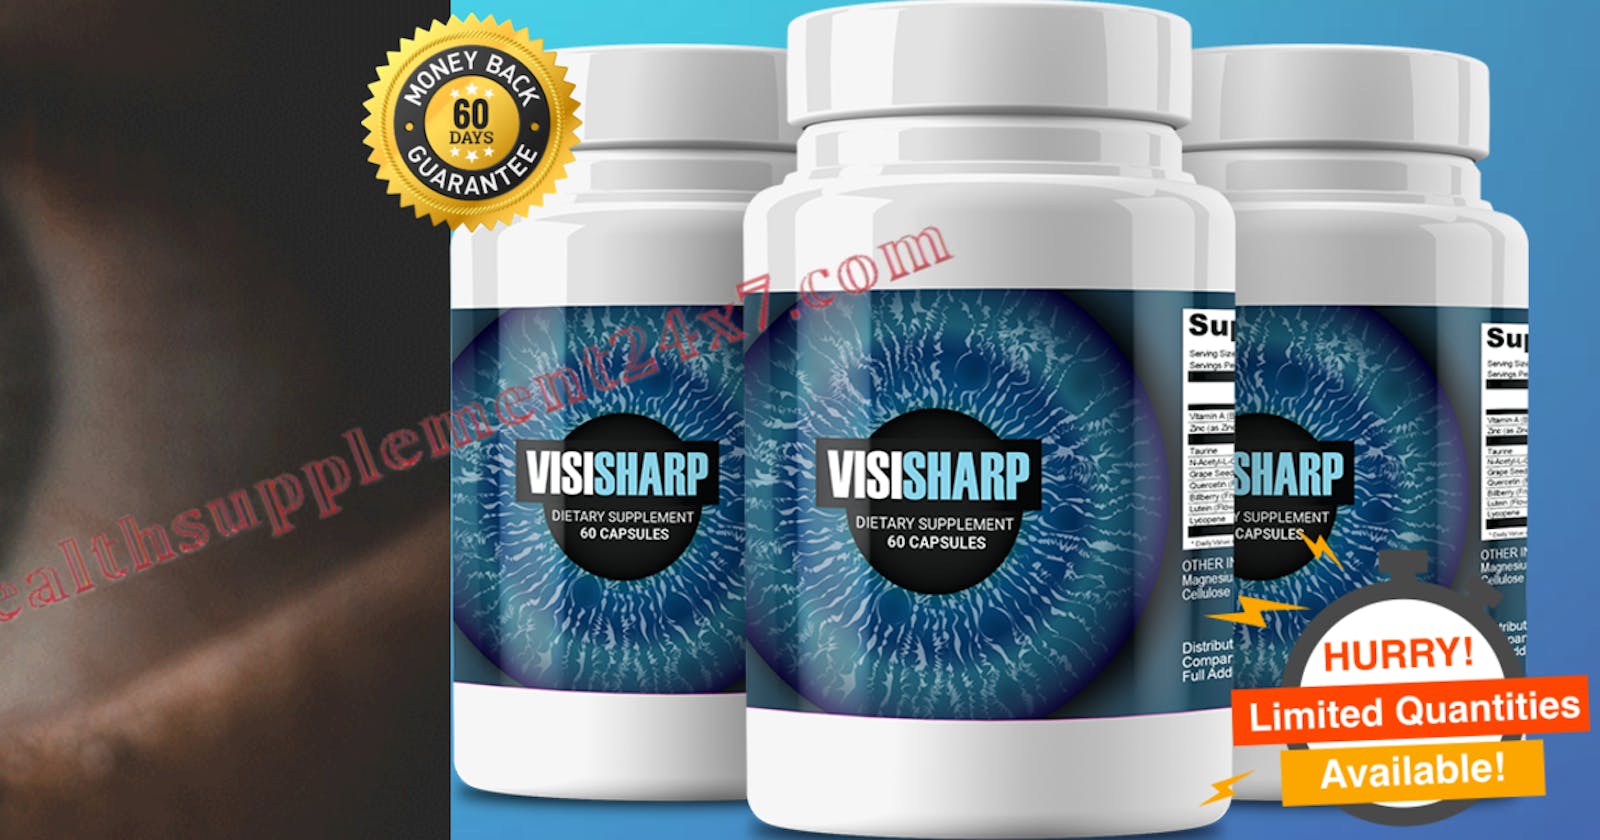 VisiSharp #1 Clinicaly Proved Eye Vison Expert Improves Seeing In Low Light | Fuzzy | Blurry Vision Problems(REAL OR HOAX)